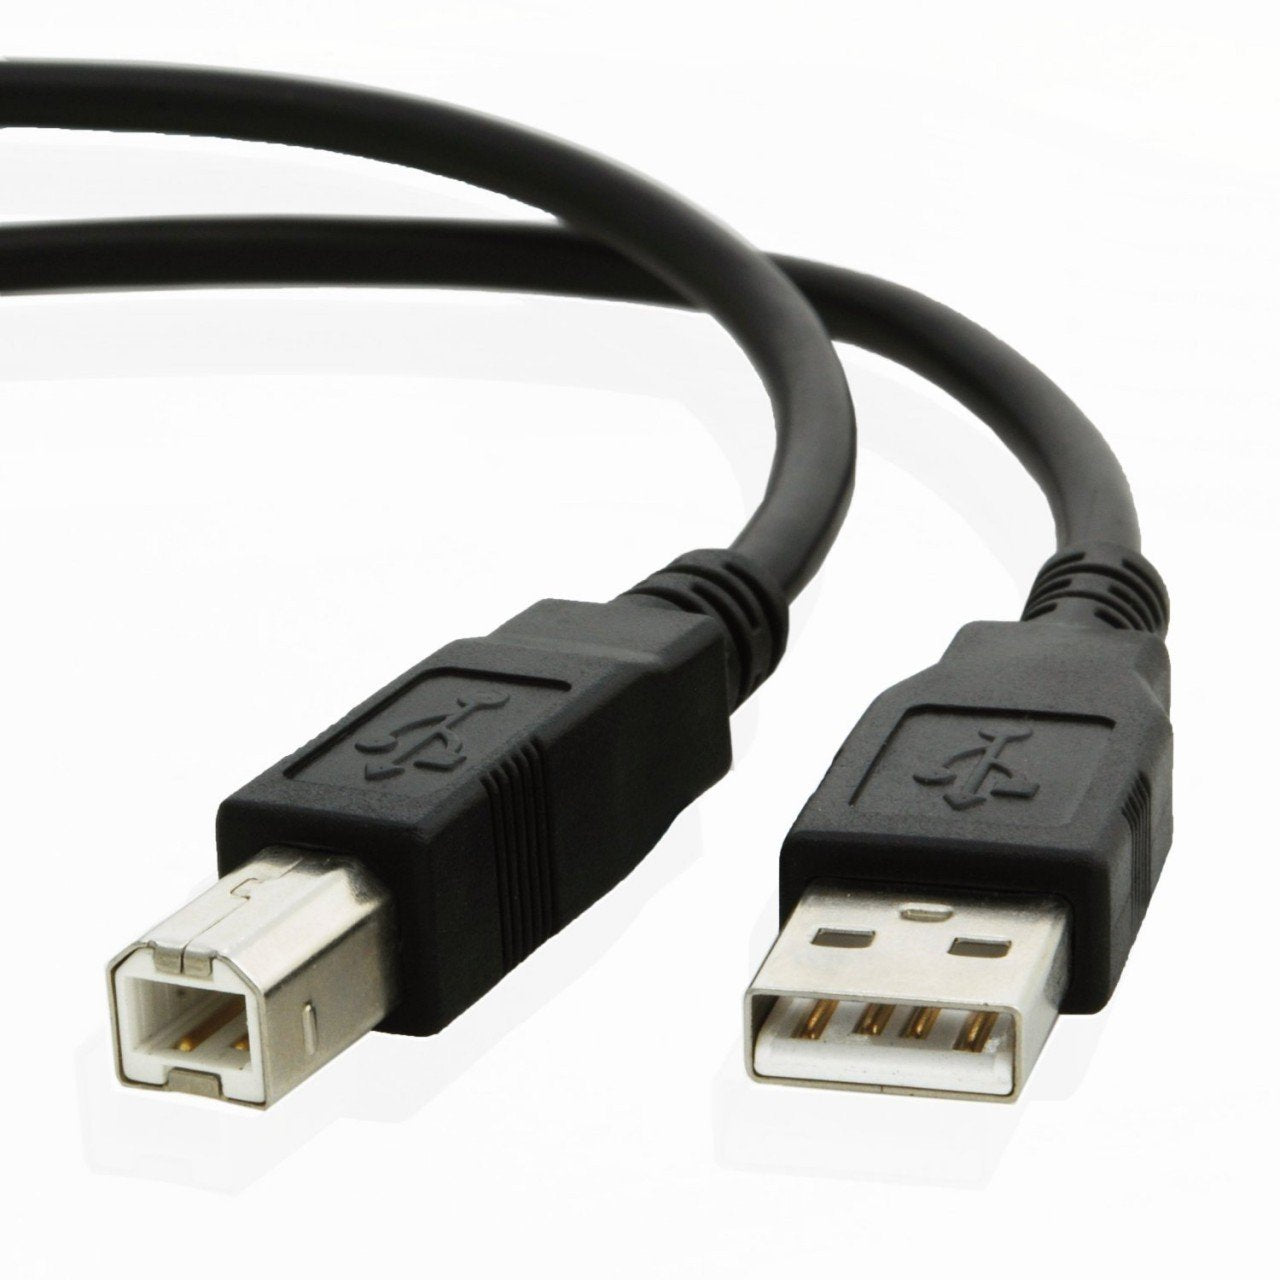 USB cable for Casio KEYBOARD CTK-7200